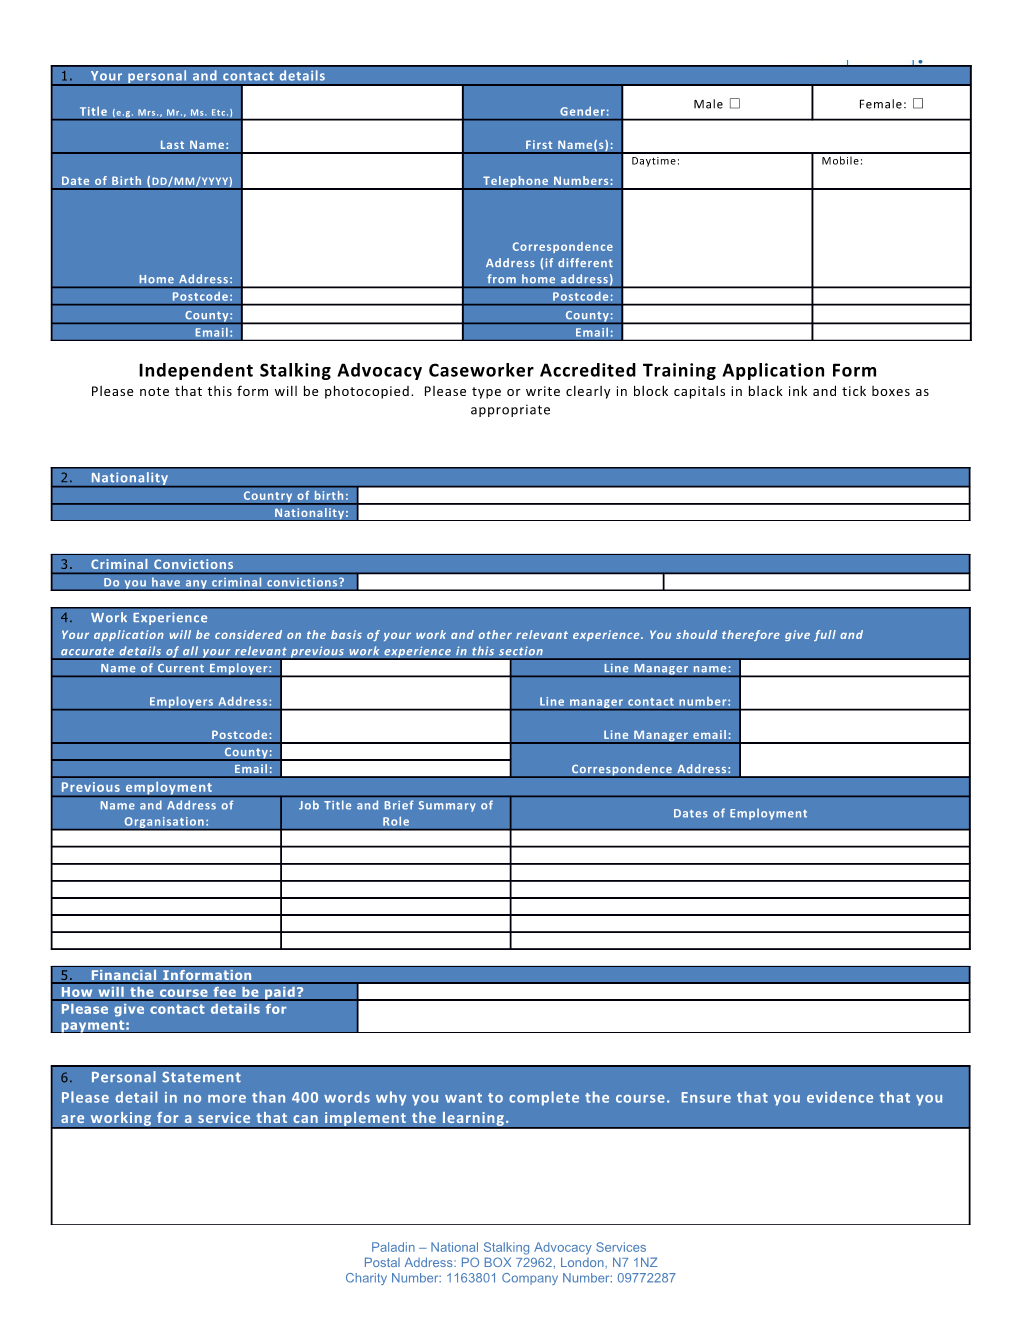 Independent Stalking Advocacy Caseworker Accredited Training Application Form